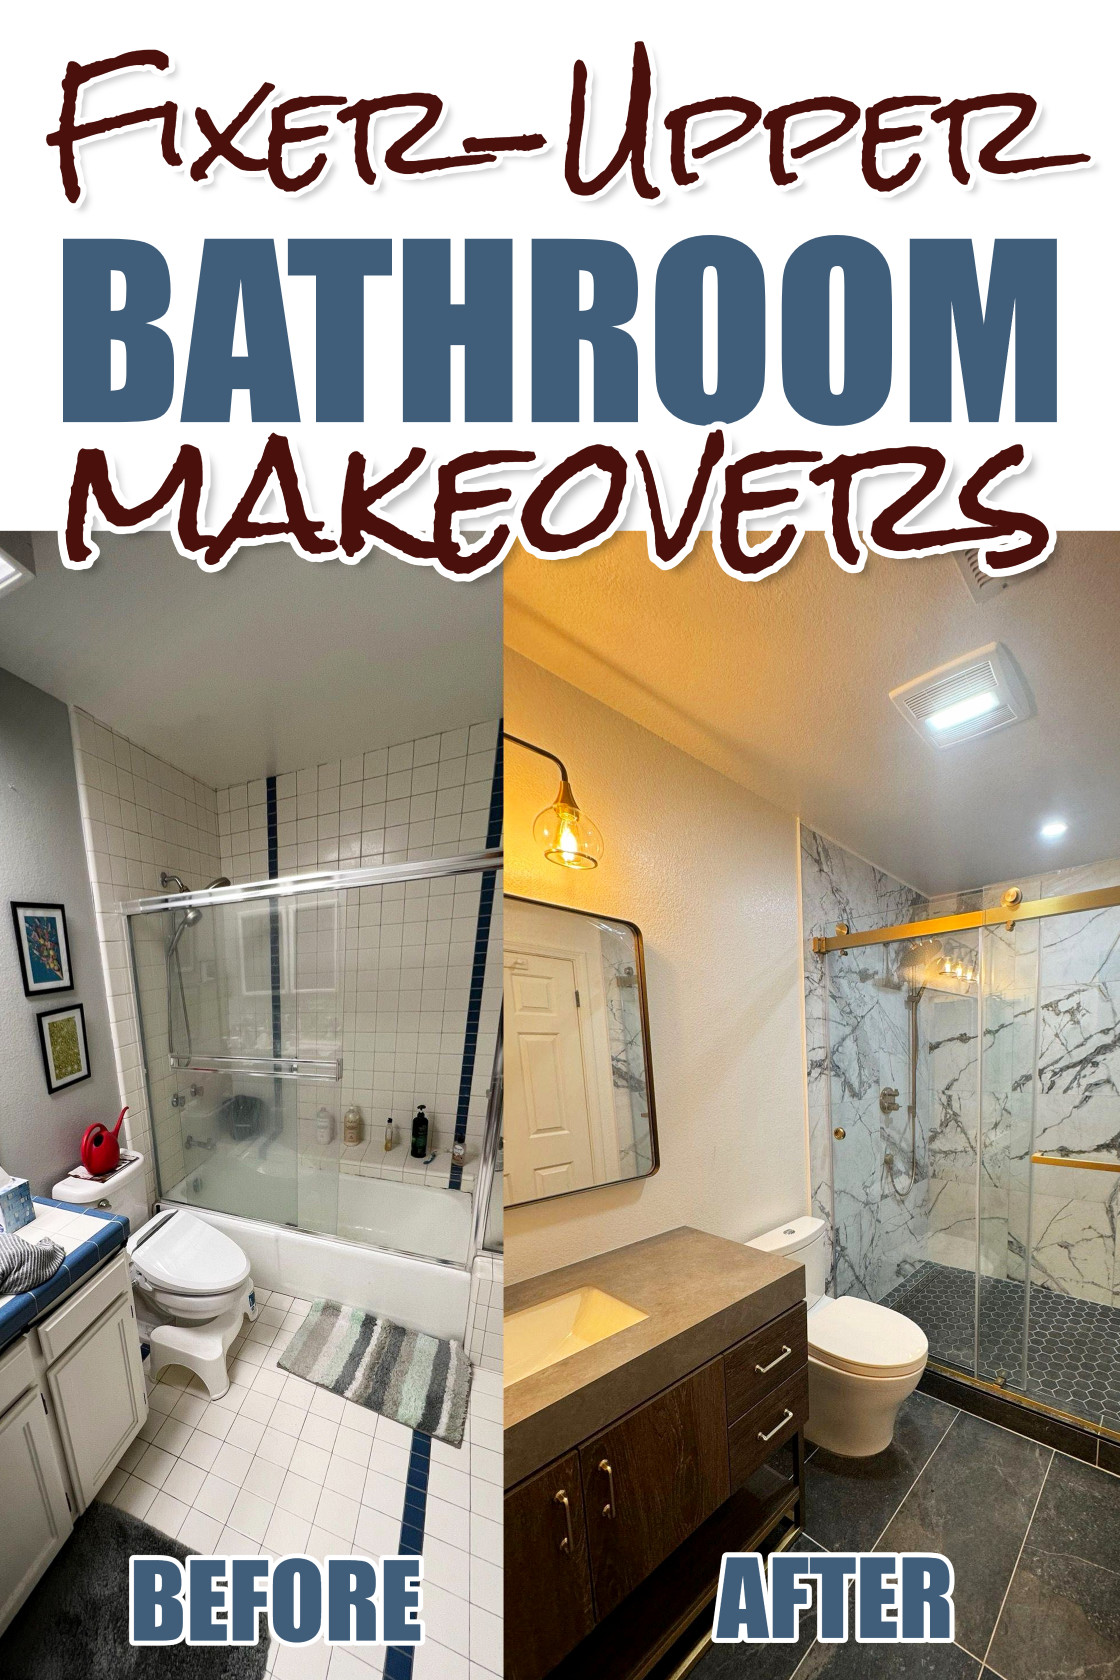 Fixer Upper Bathroom Makeovers Makeovers Before and After Budget-Friendly Upgrades